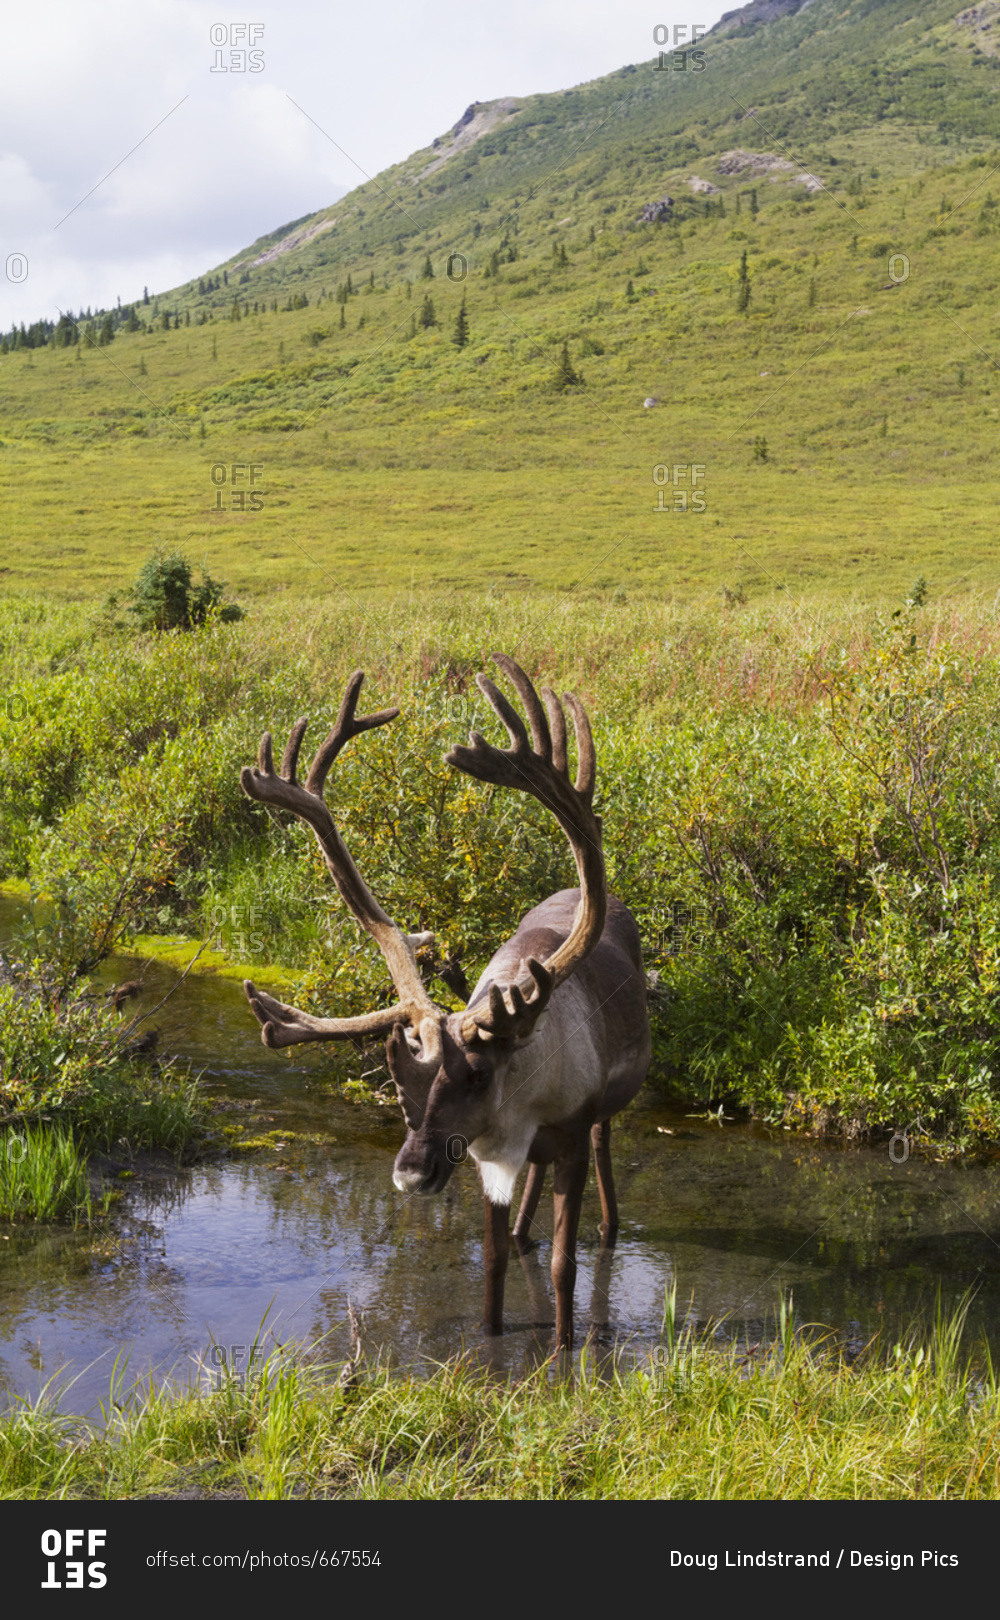 August 16, 2013: Bull Caribou Stands In A Pond Near The Savage River To Escape Insects, Denali National Park, Interior Alaska, USA